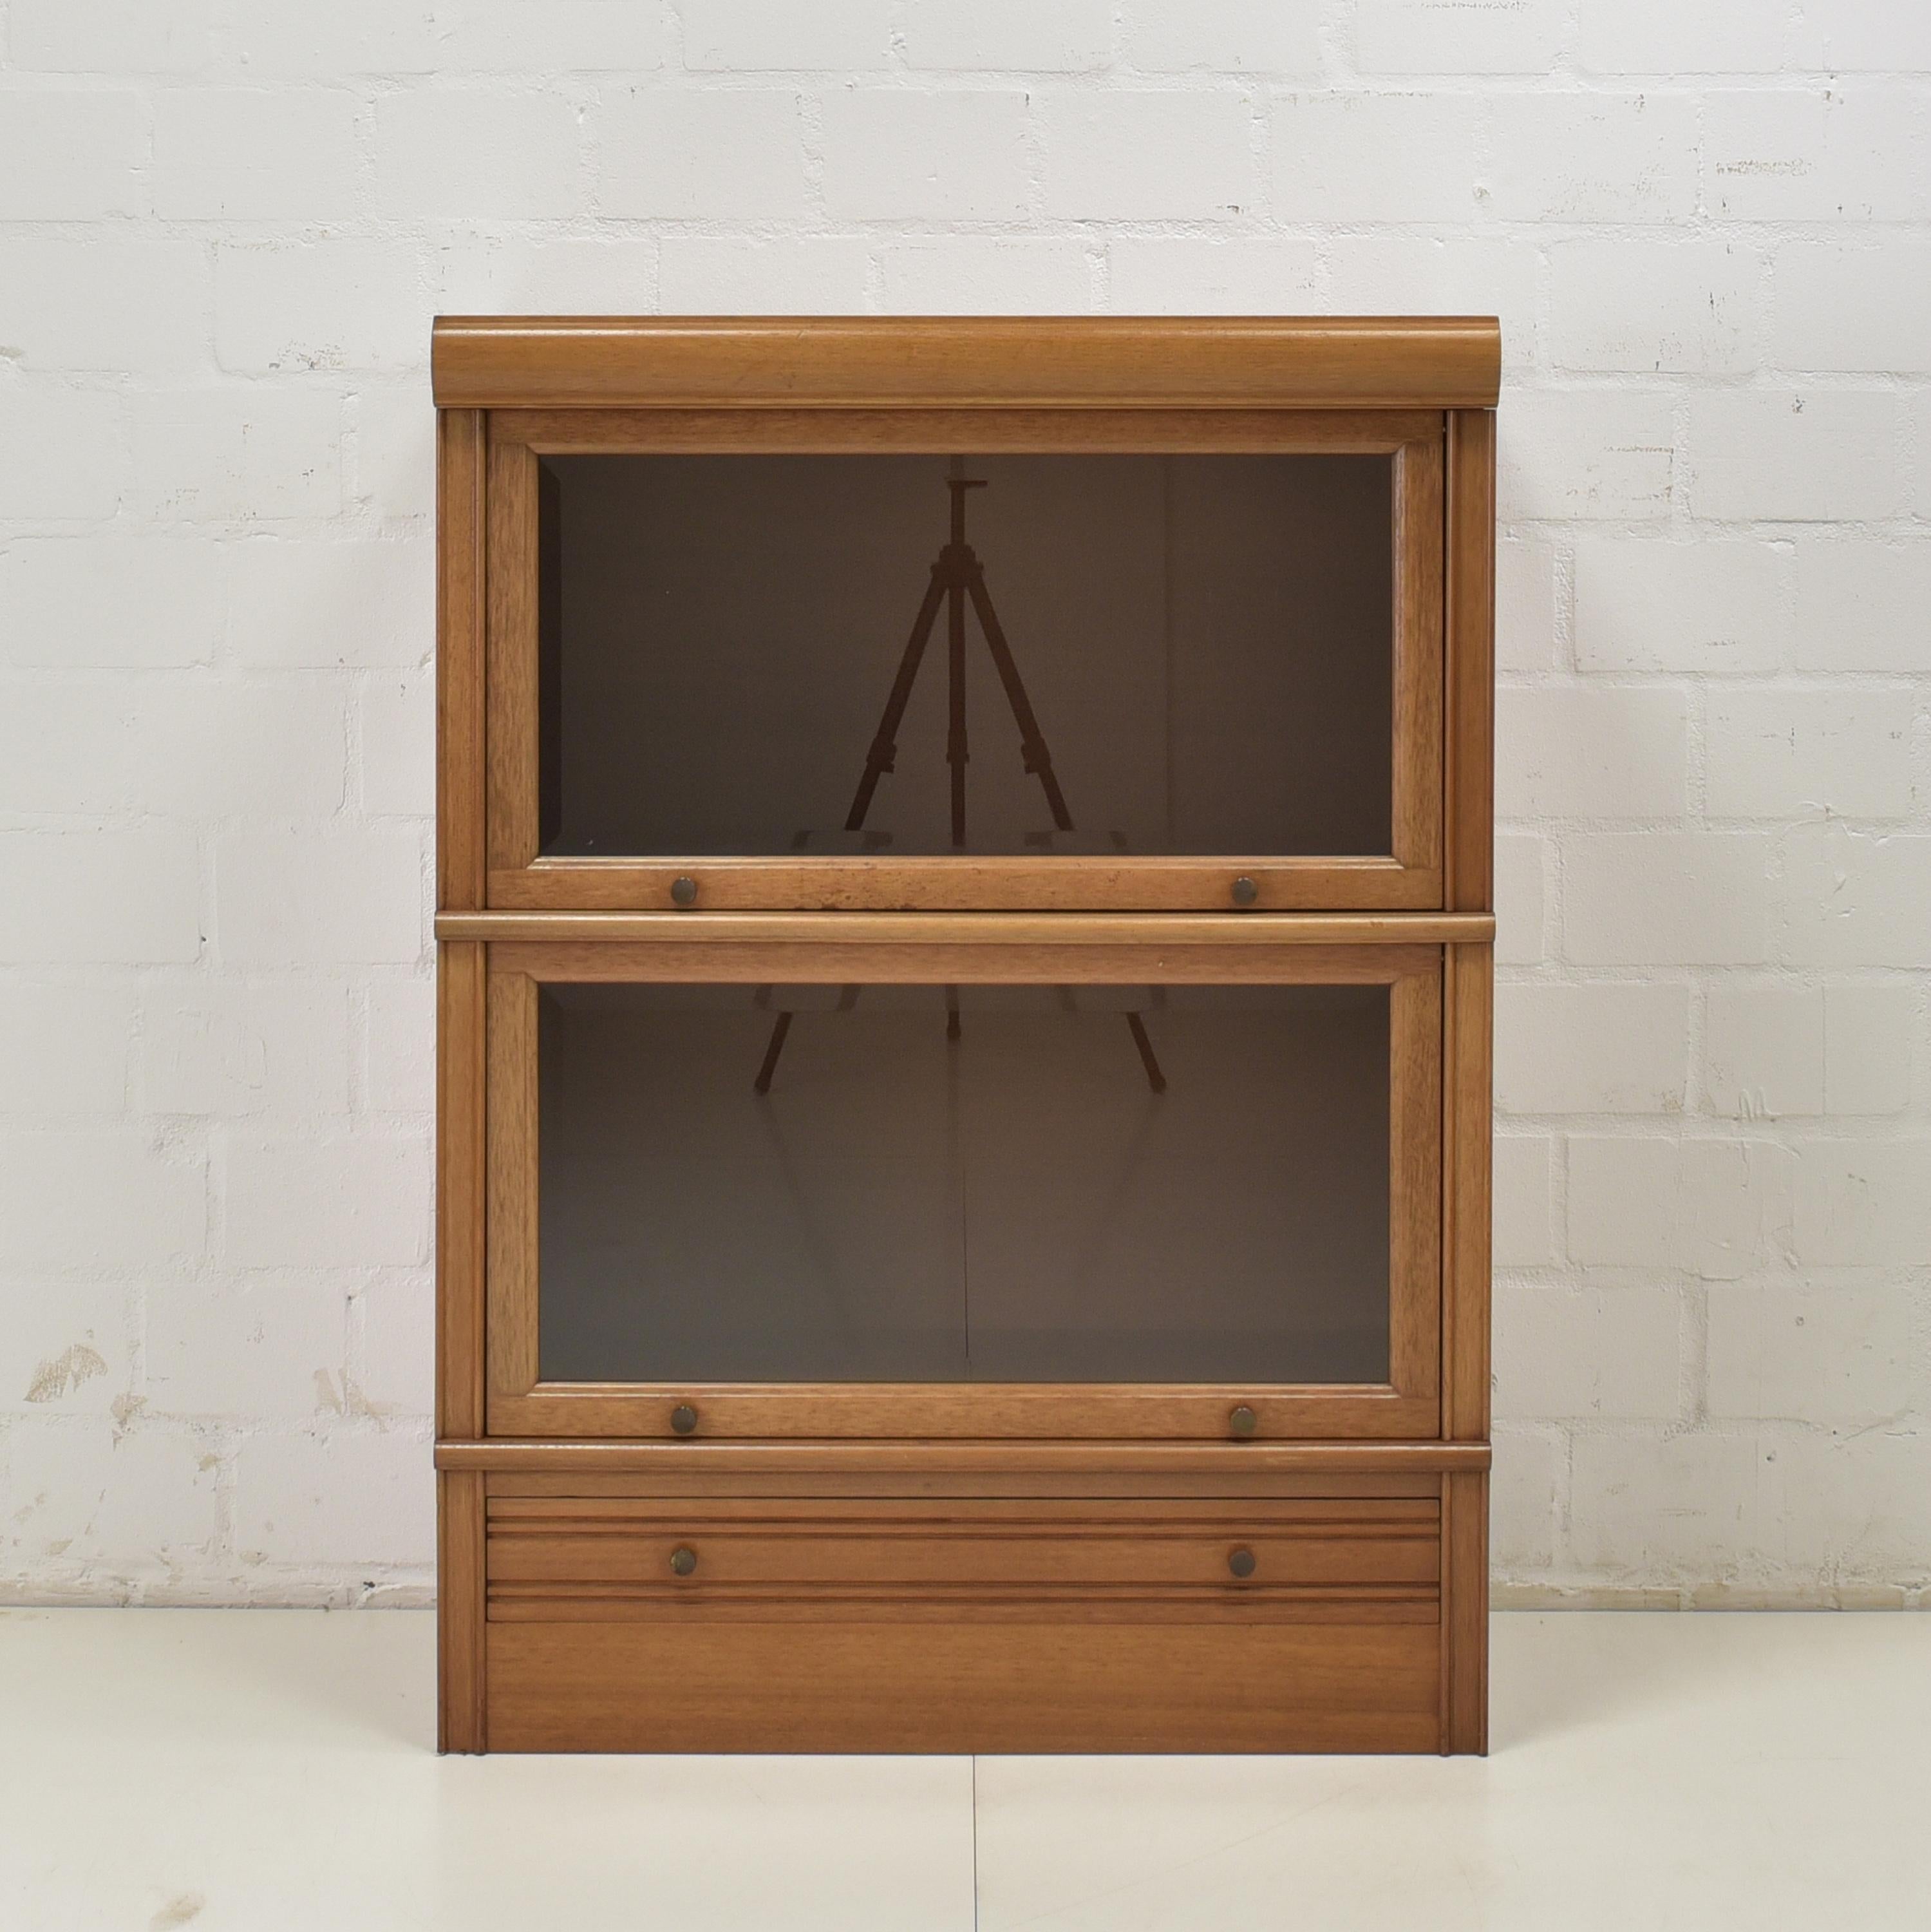 Module cabinet restored display cabinet filing cabinet module shelf 2/2

Features:
4-part model with a drawer base, two showcase modules and a lid
The modules are interchangeable
Only the drawer base always comes down and the lid on top
Glass